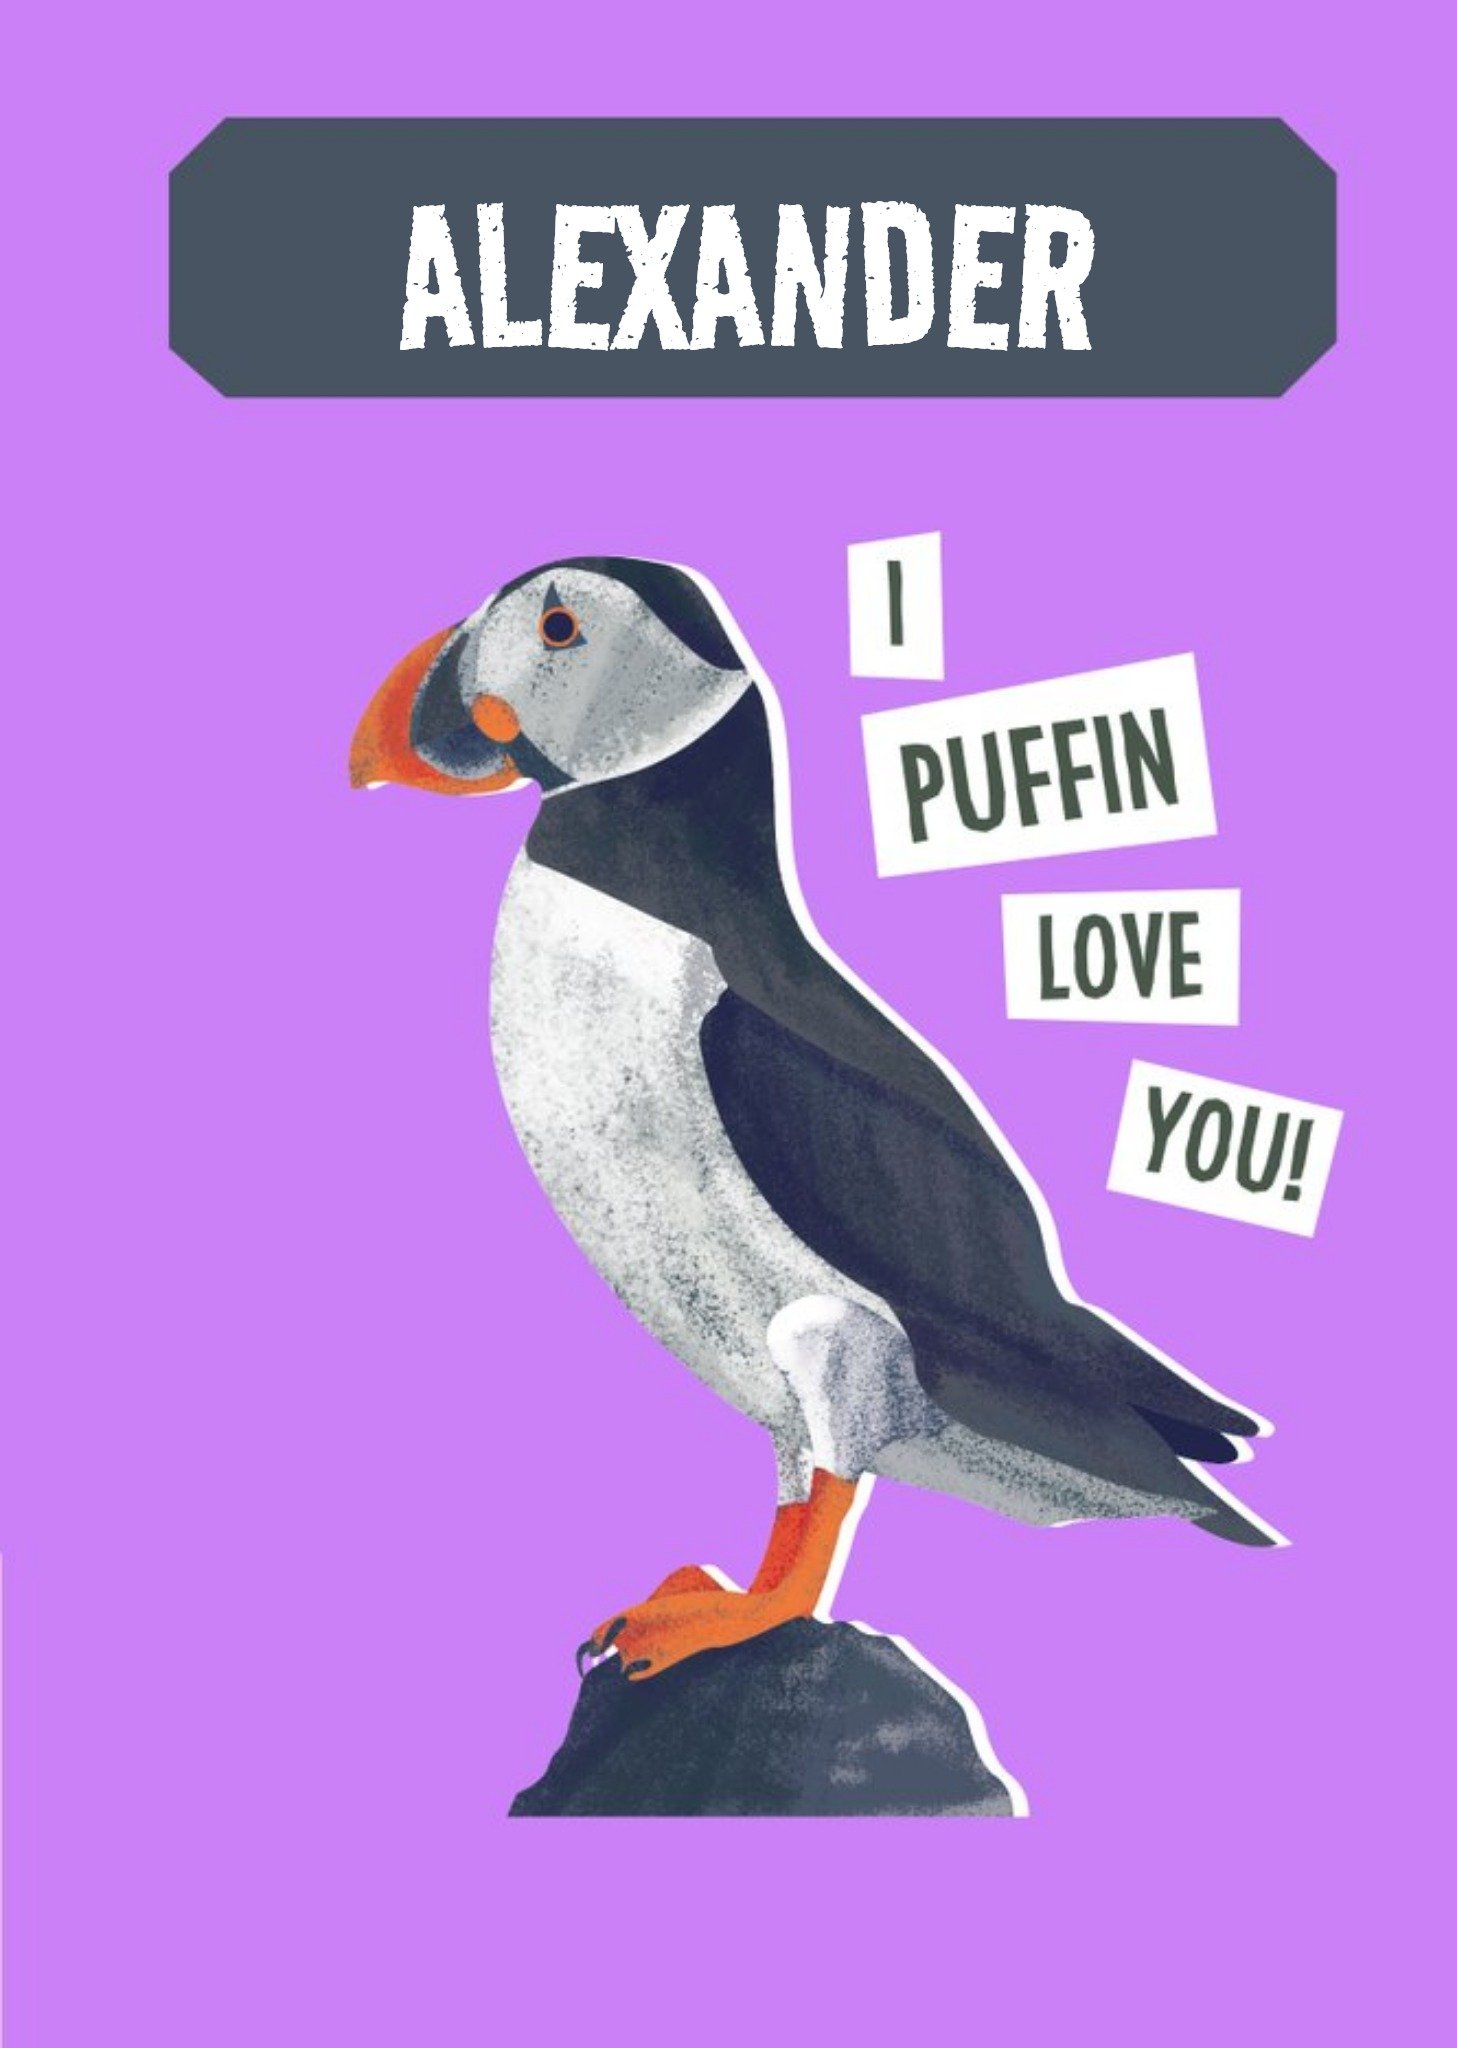 The Natural History Museum Natural History Museum I Puffin Love You Valentine's Day Card, Large